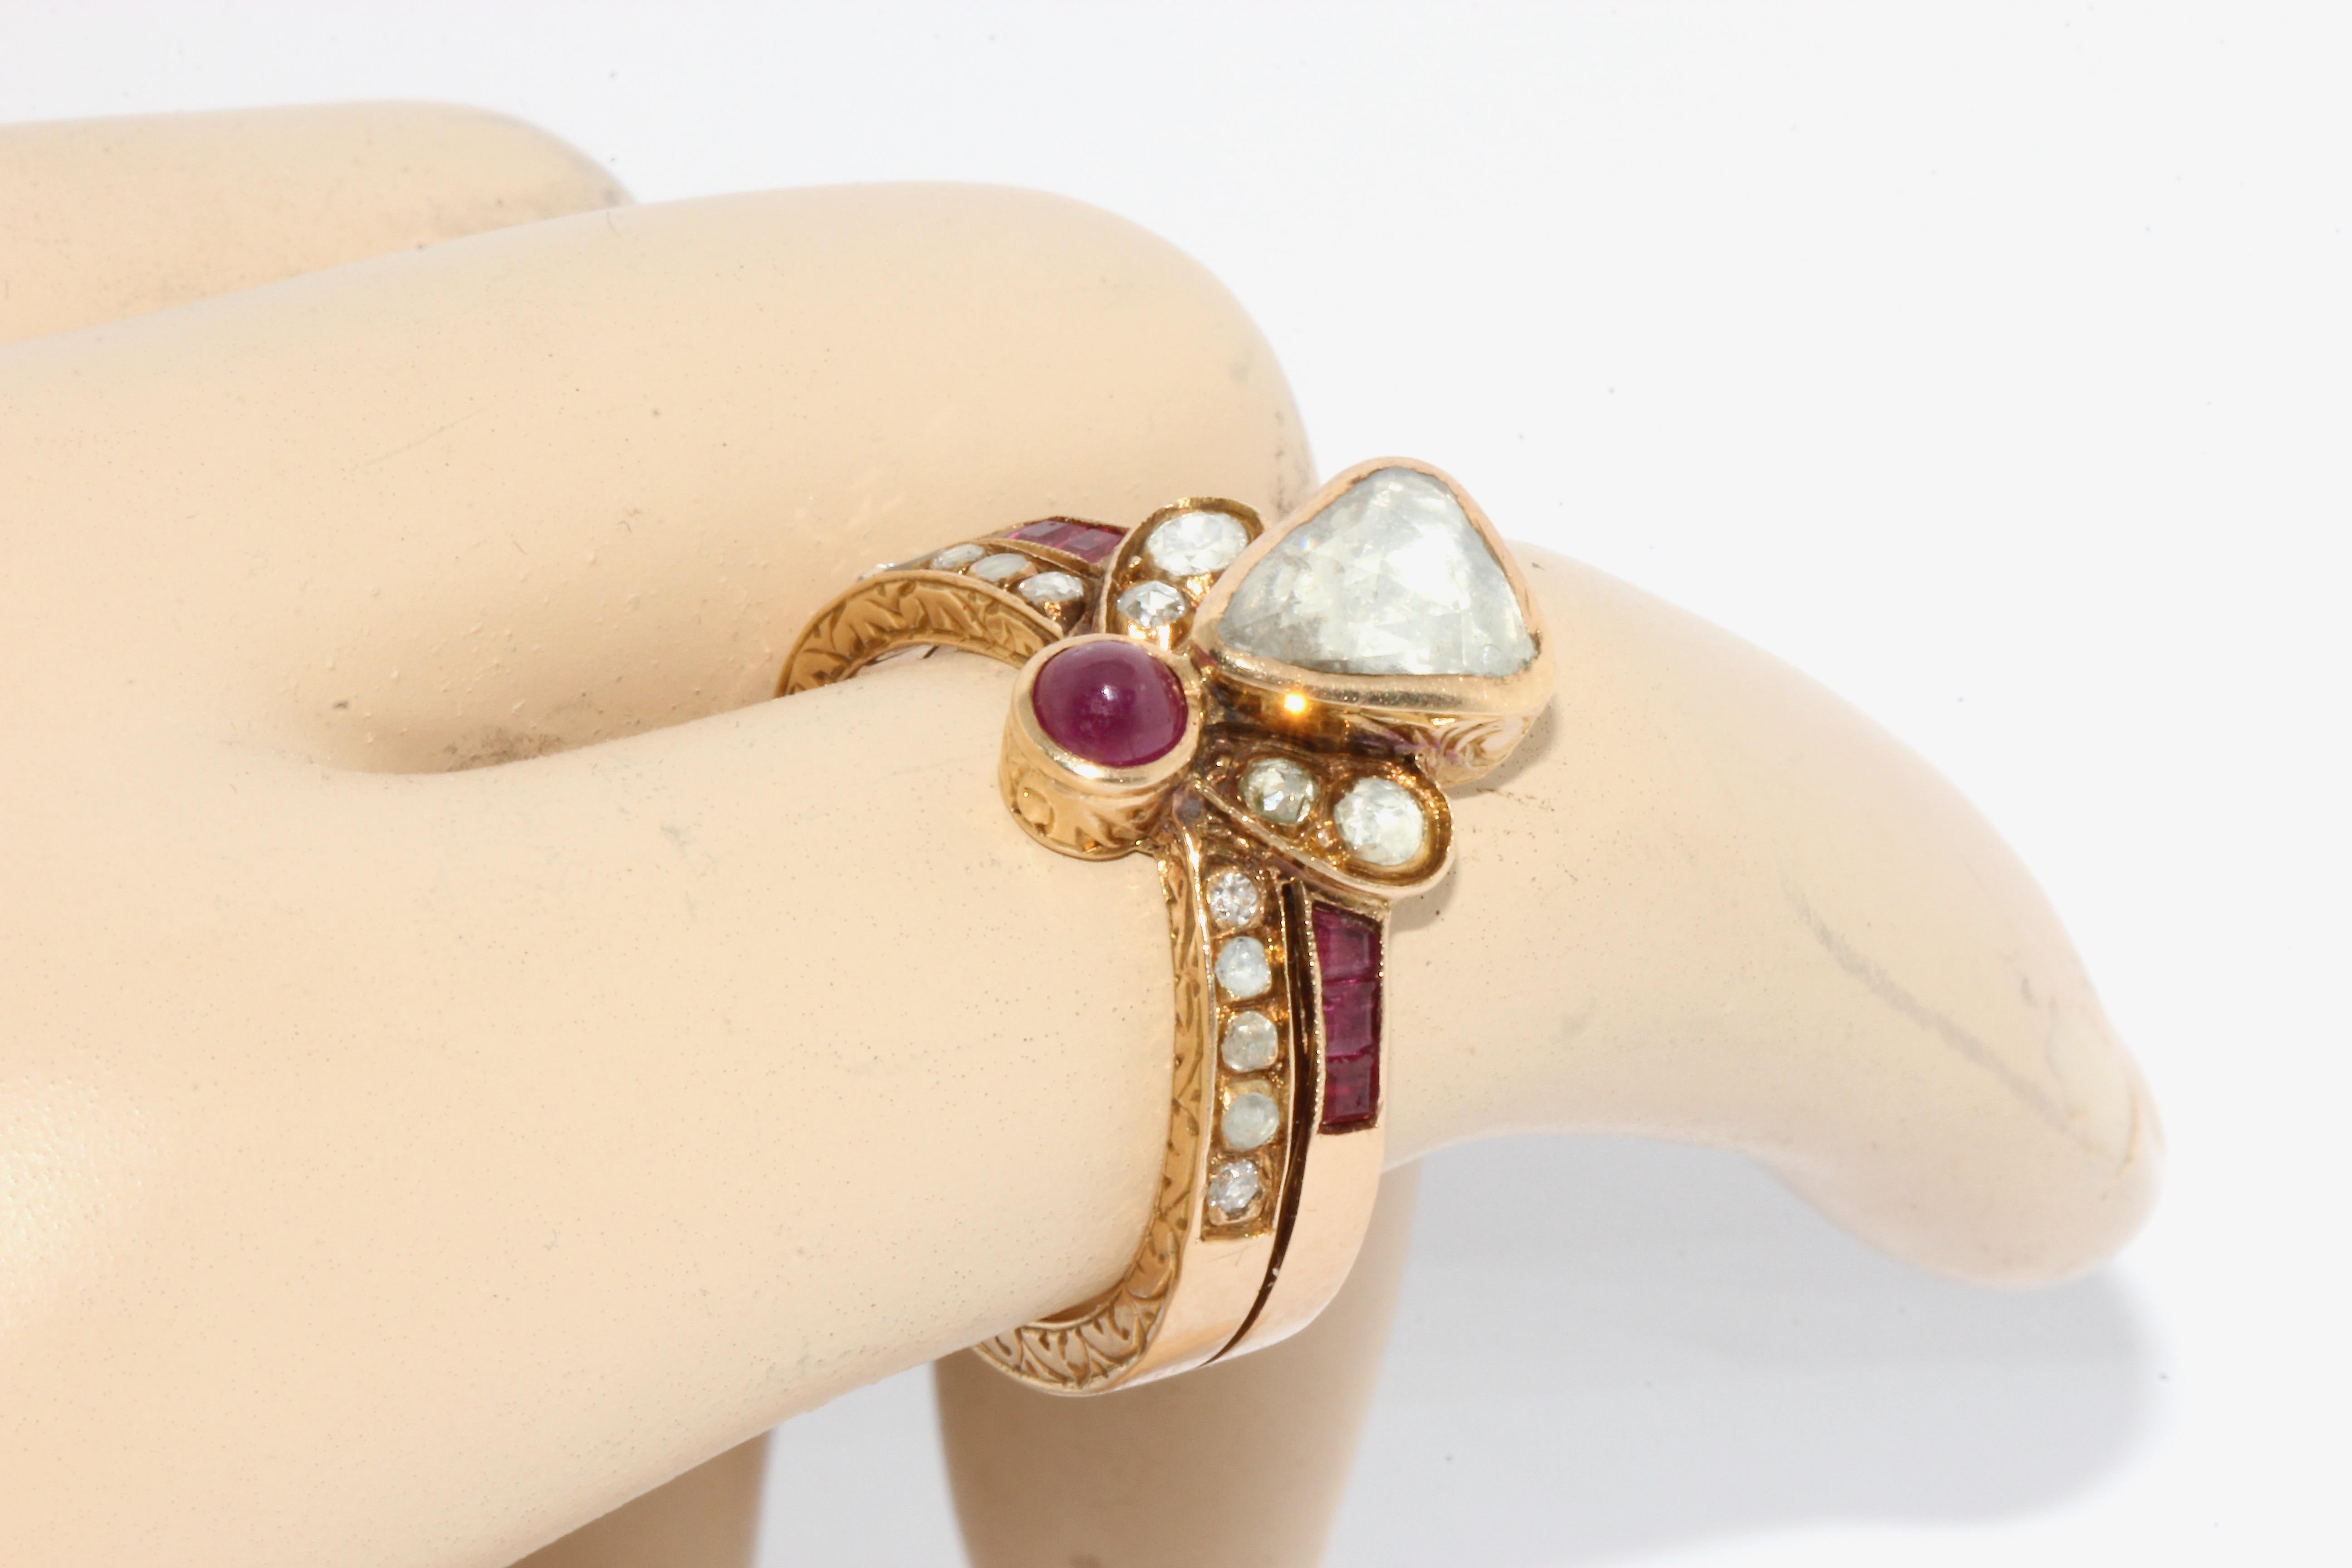 Women's Antique, Royal Gold Ring with Rose Cut Trillion Diamond, Rubies and Ornaments For Sale